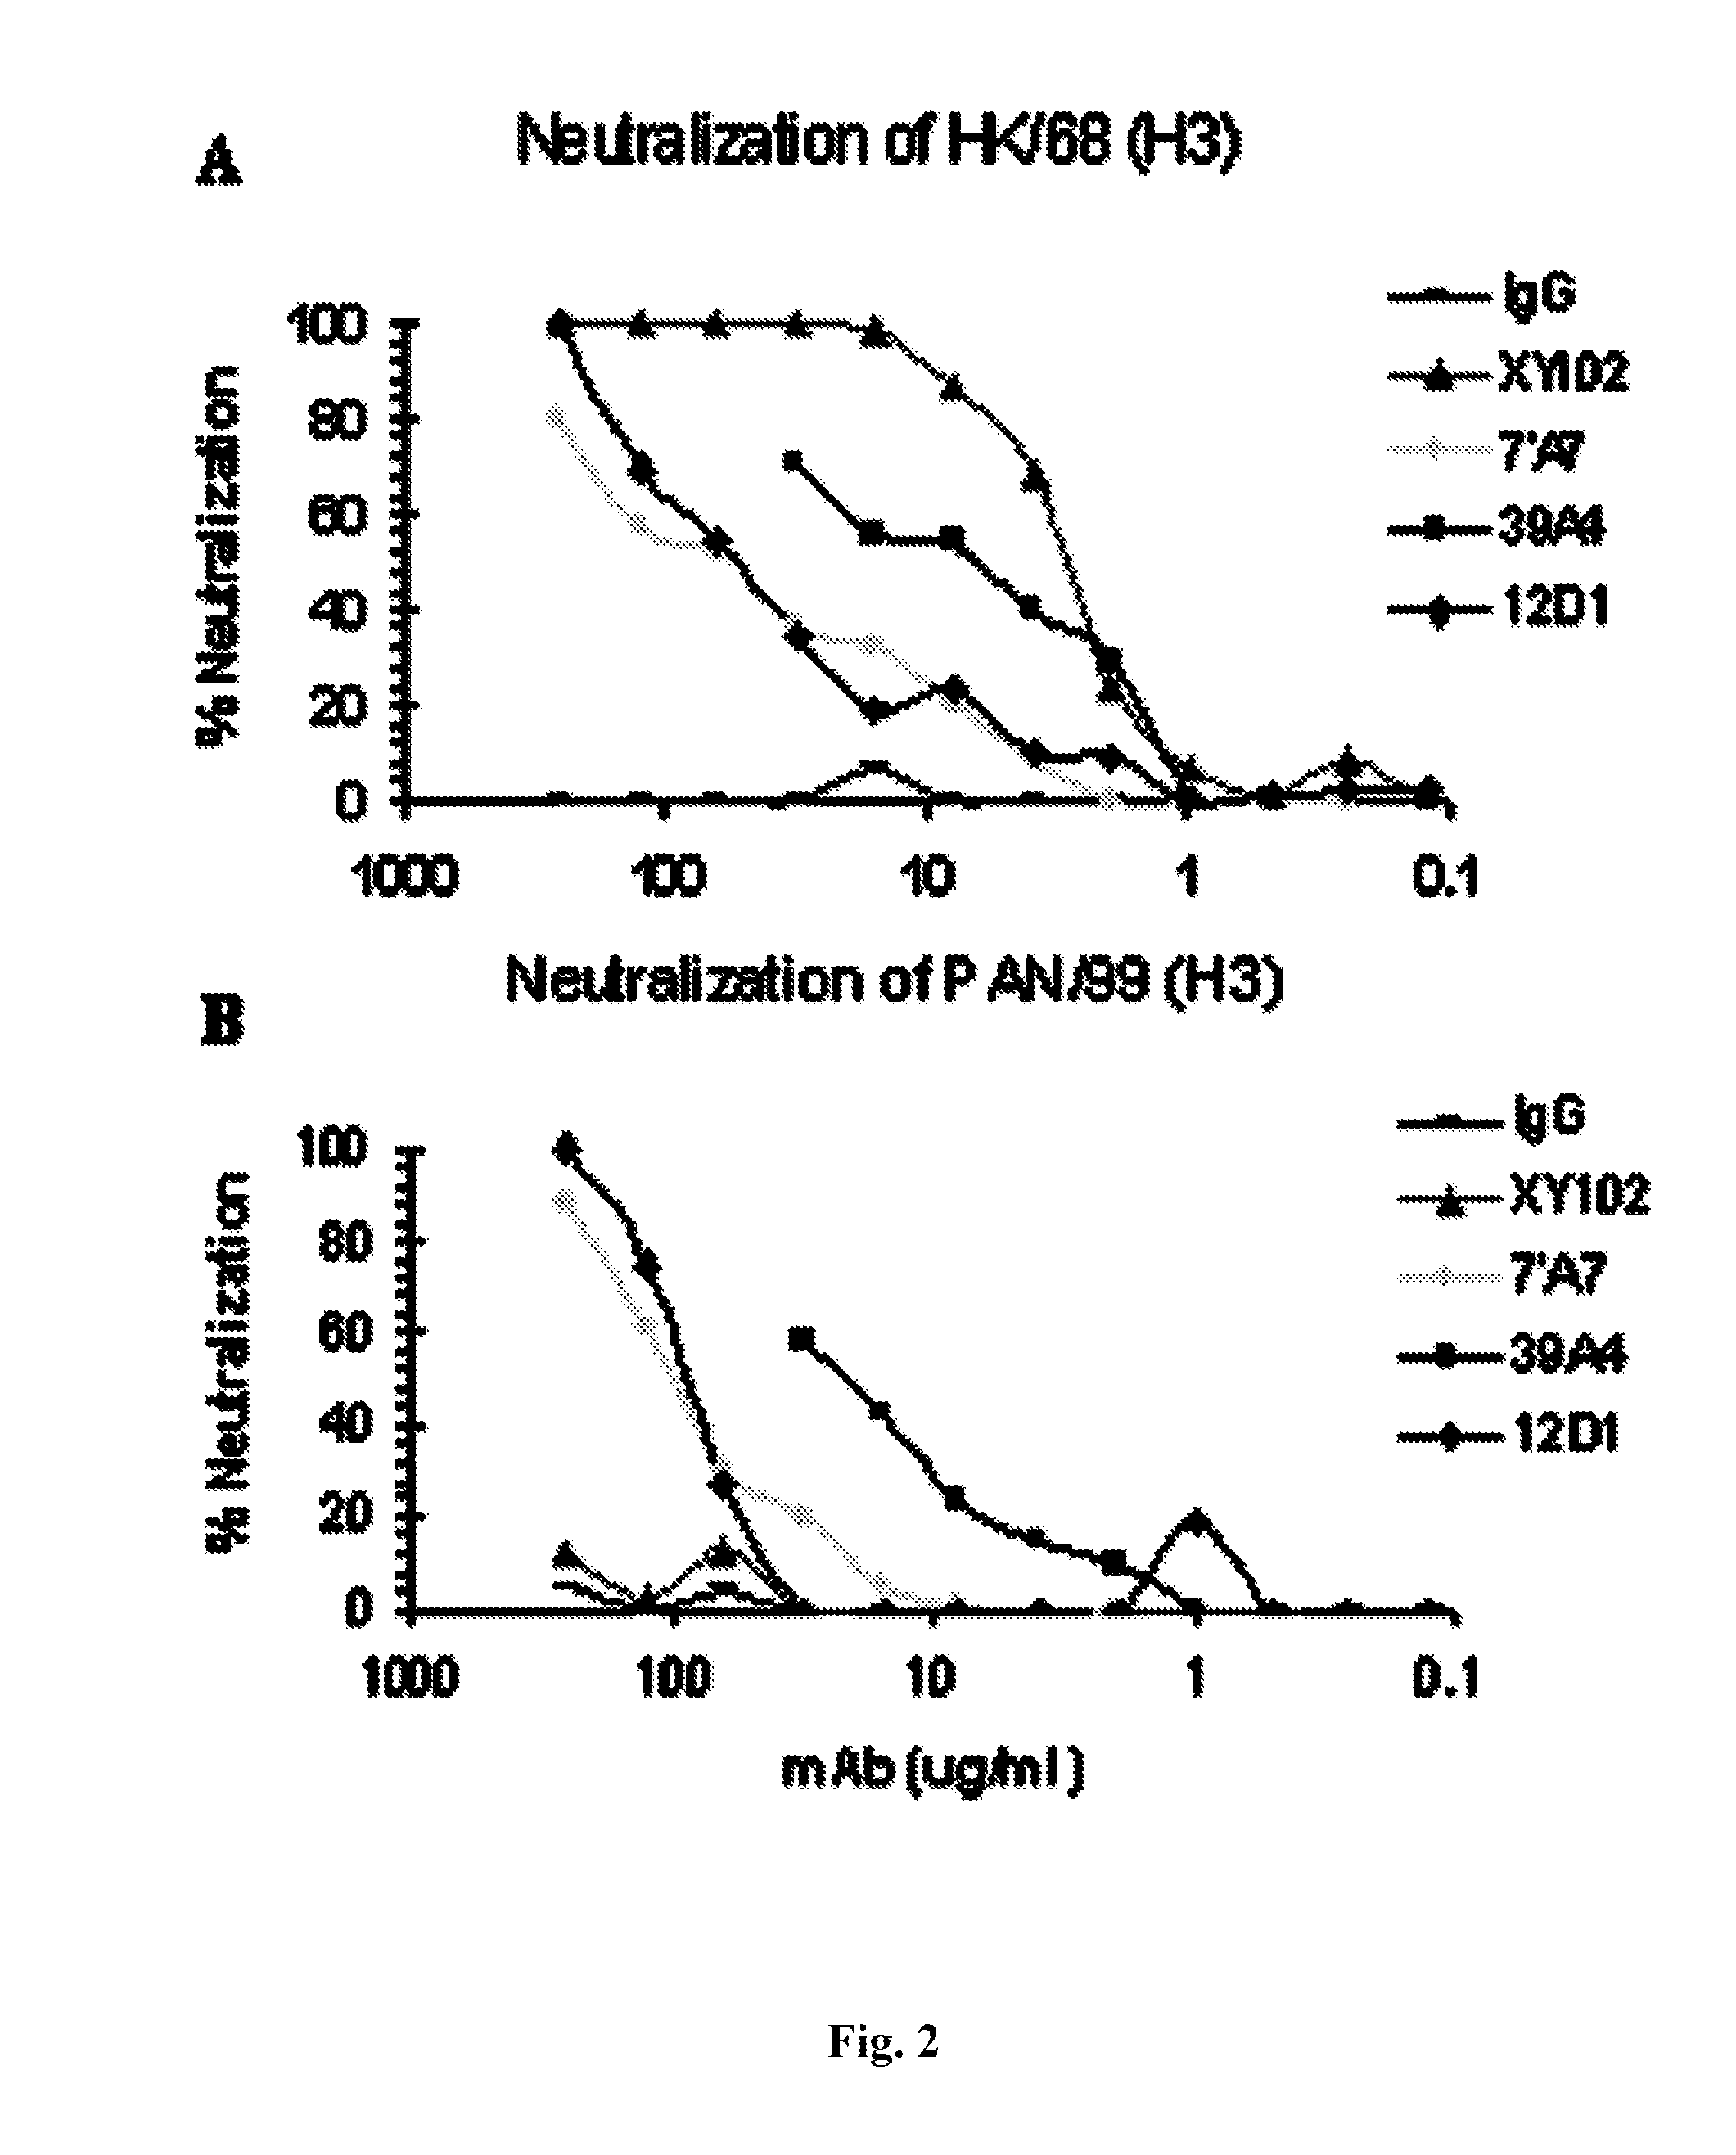 Monoclonal antibodies against influenza virus generated by cyclical administration and uses thereof